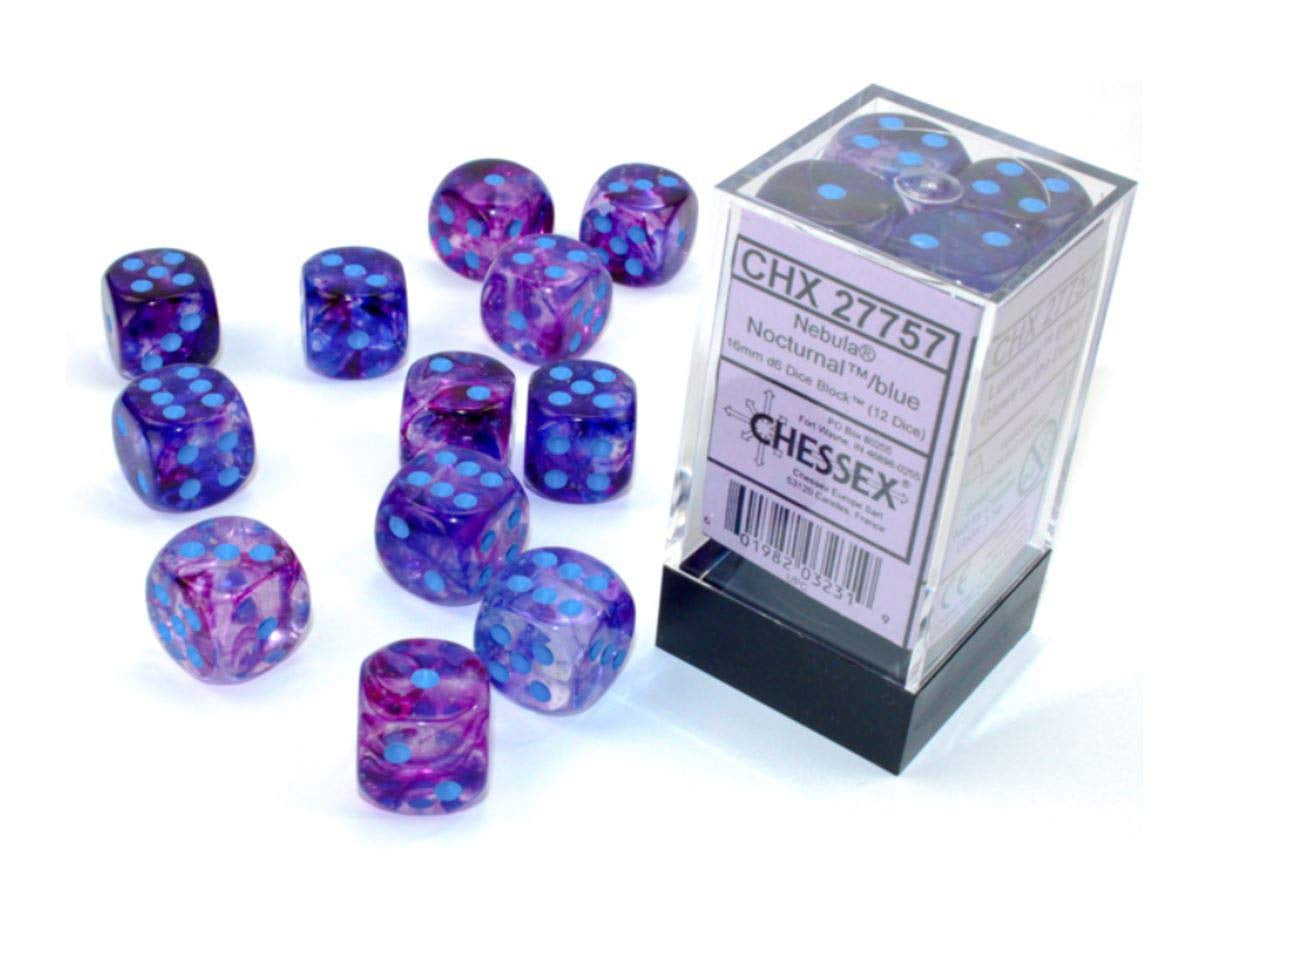 CHESSEX 16mm D6 DICE BLOCK (12 DICE) -NEBULA NOCTURNAL WITH BLUE